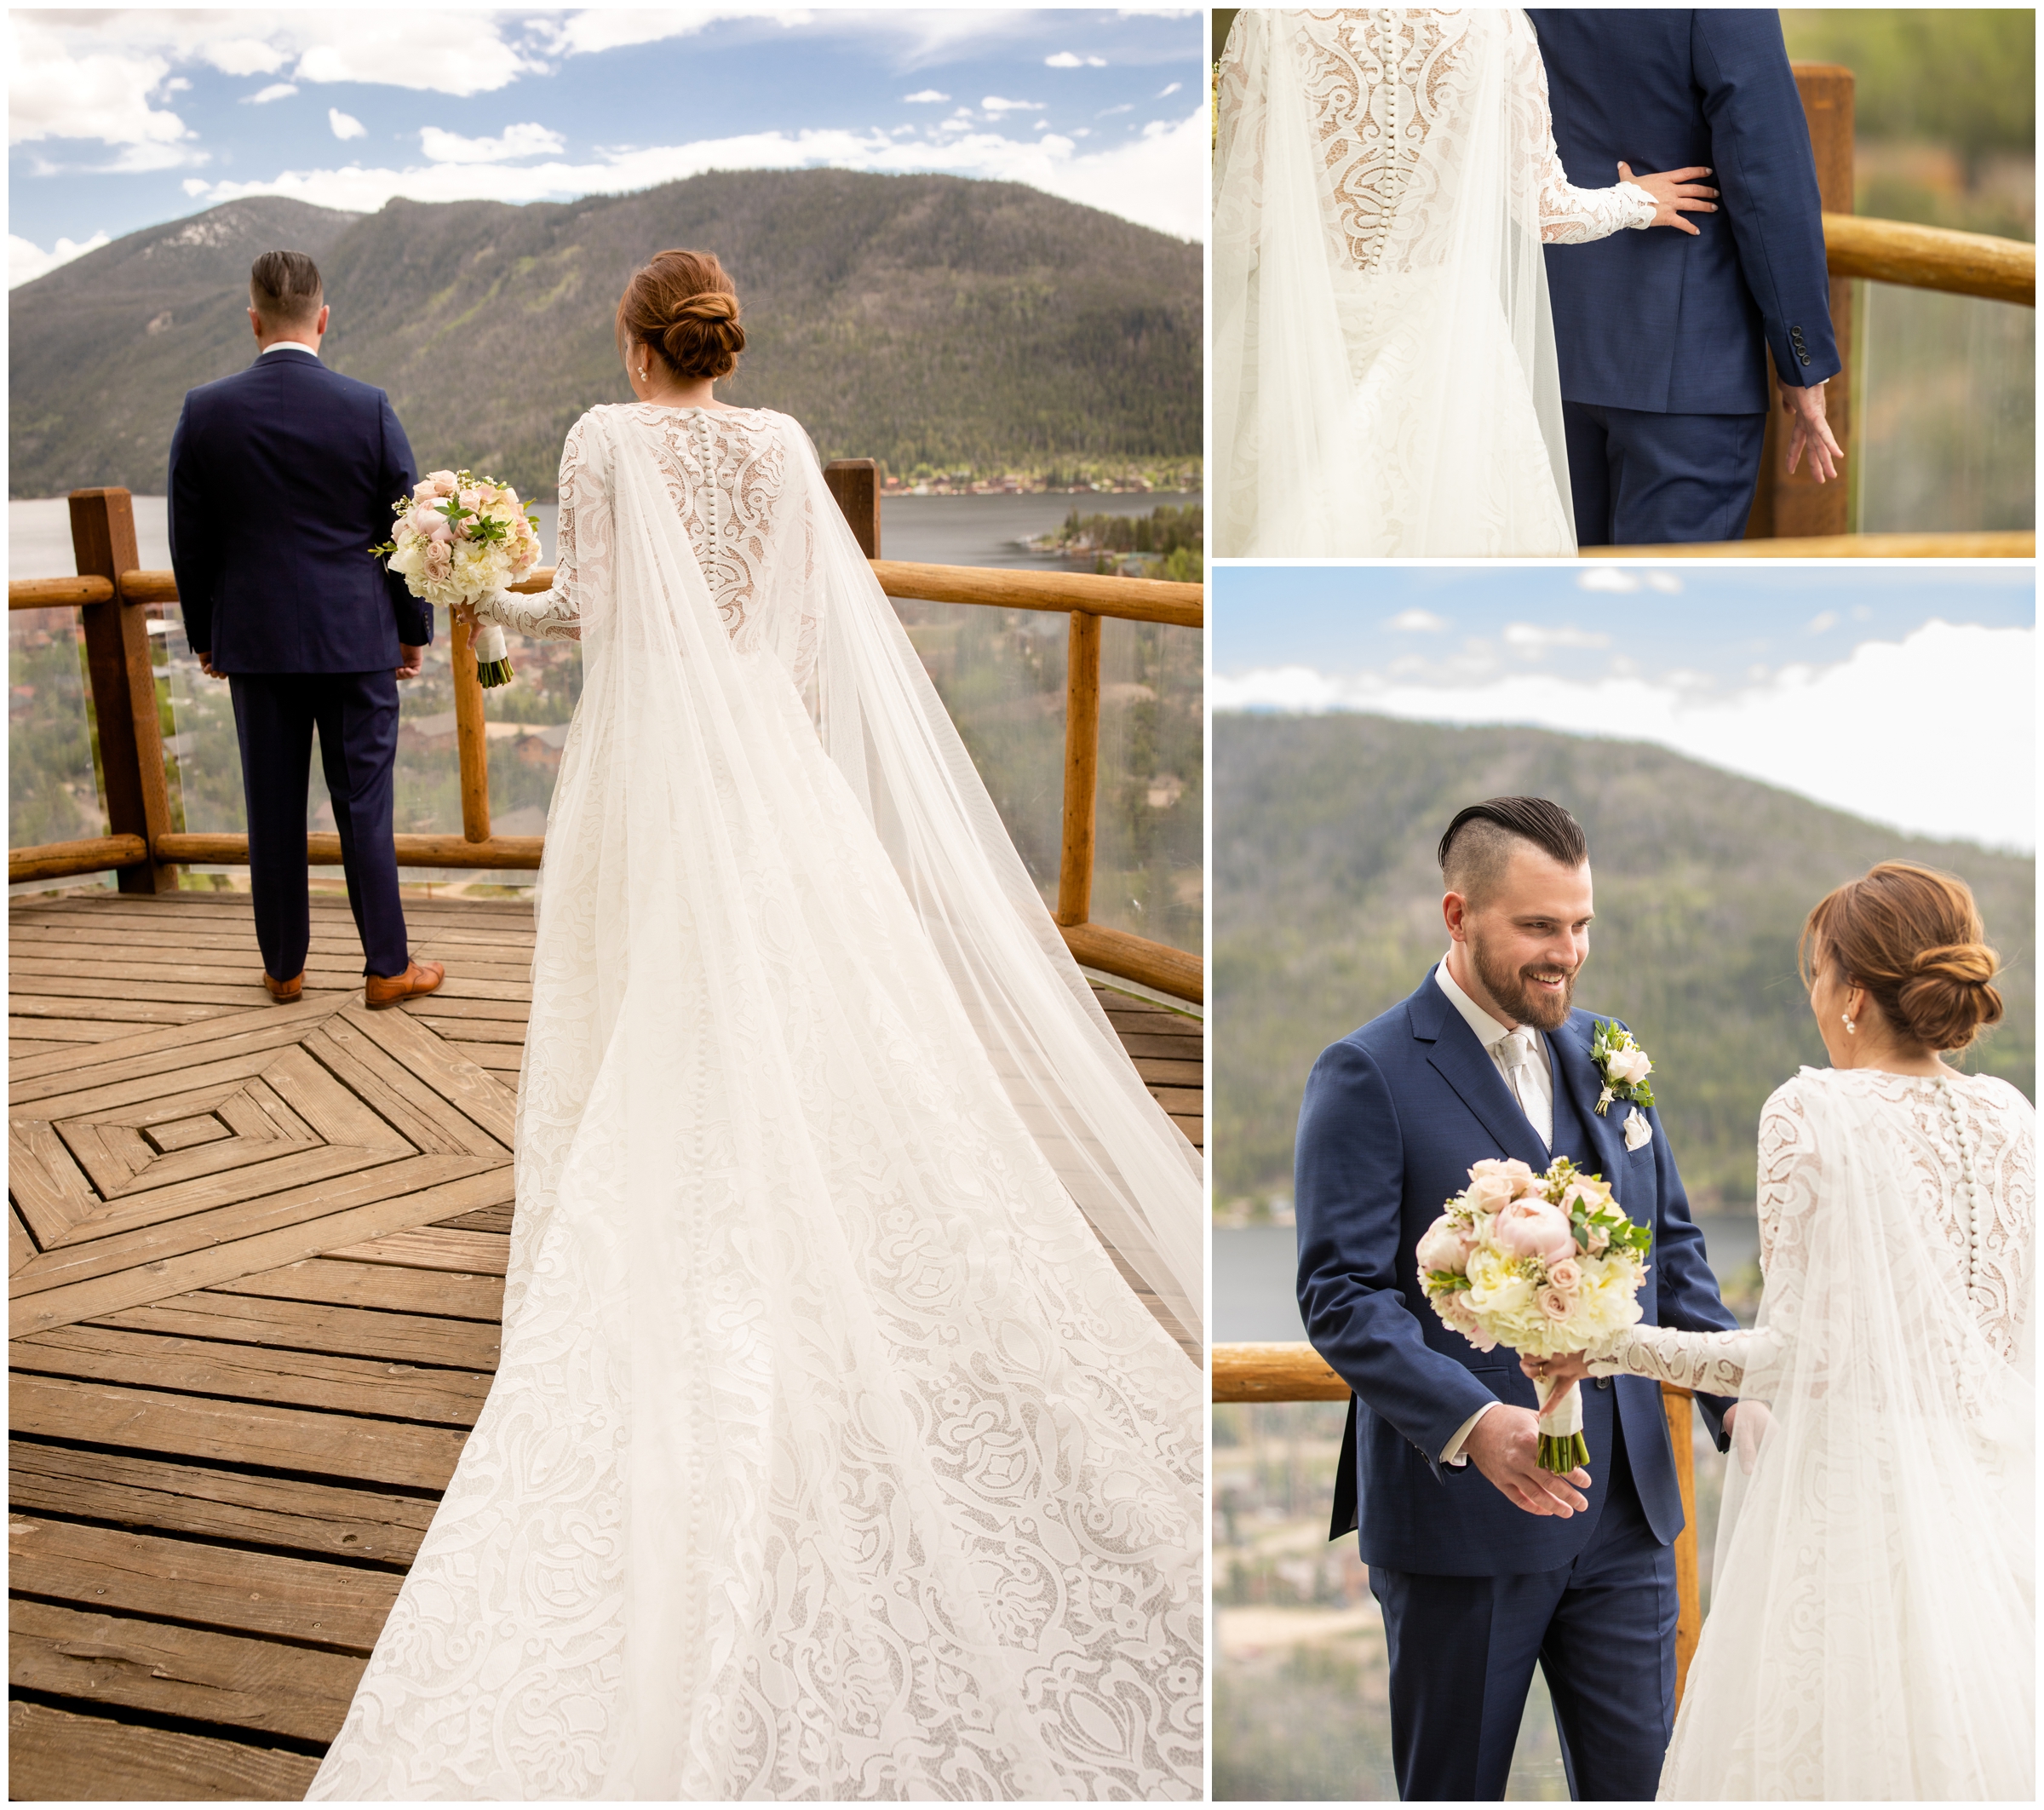 bride and groom's first look on wooden deck at Grand Lake Lodge wedding